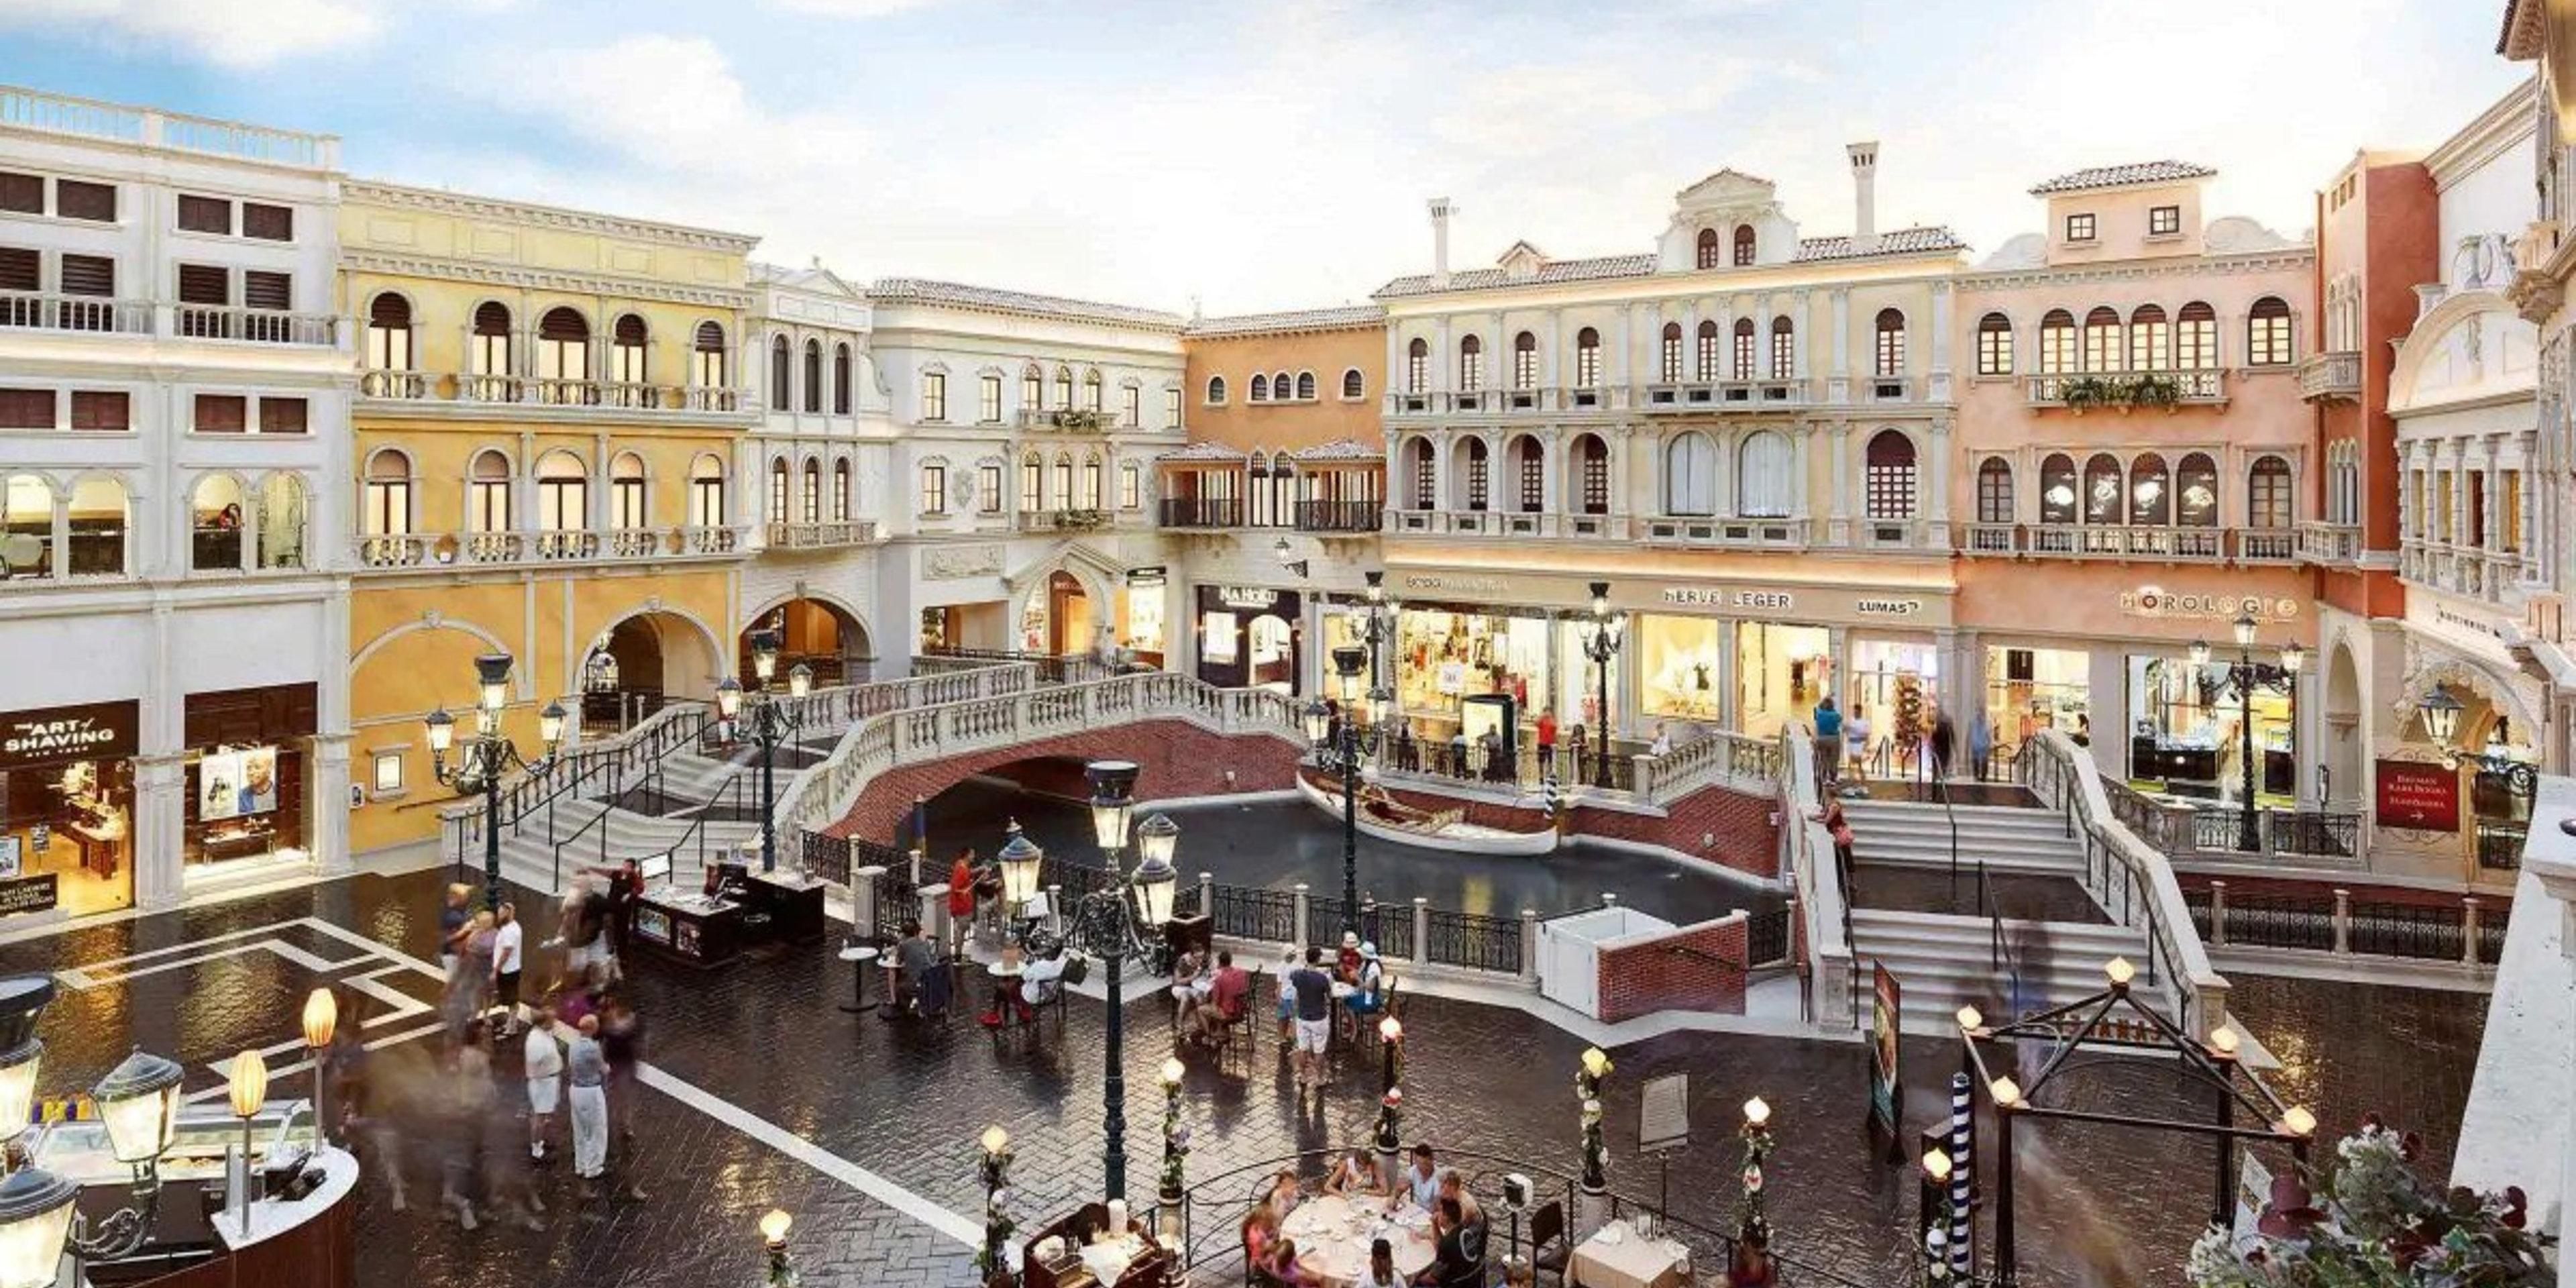 The Grand Canal Shoppes at The Venetian Resort is a premier destination for Las Vegas luxury shopping. Featuring over 160 signature stores with dozens of luxury brands, the Shoppes are more than a Las Vegas shopping mall; they're a style lover's dream.